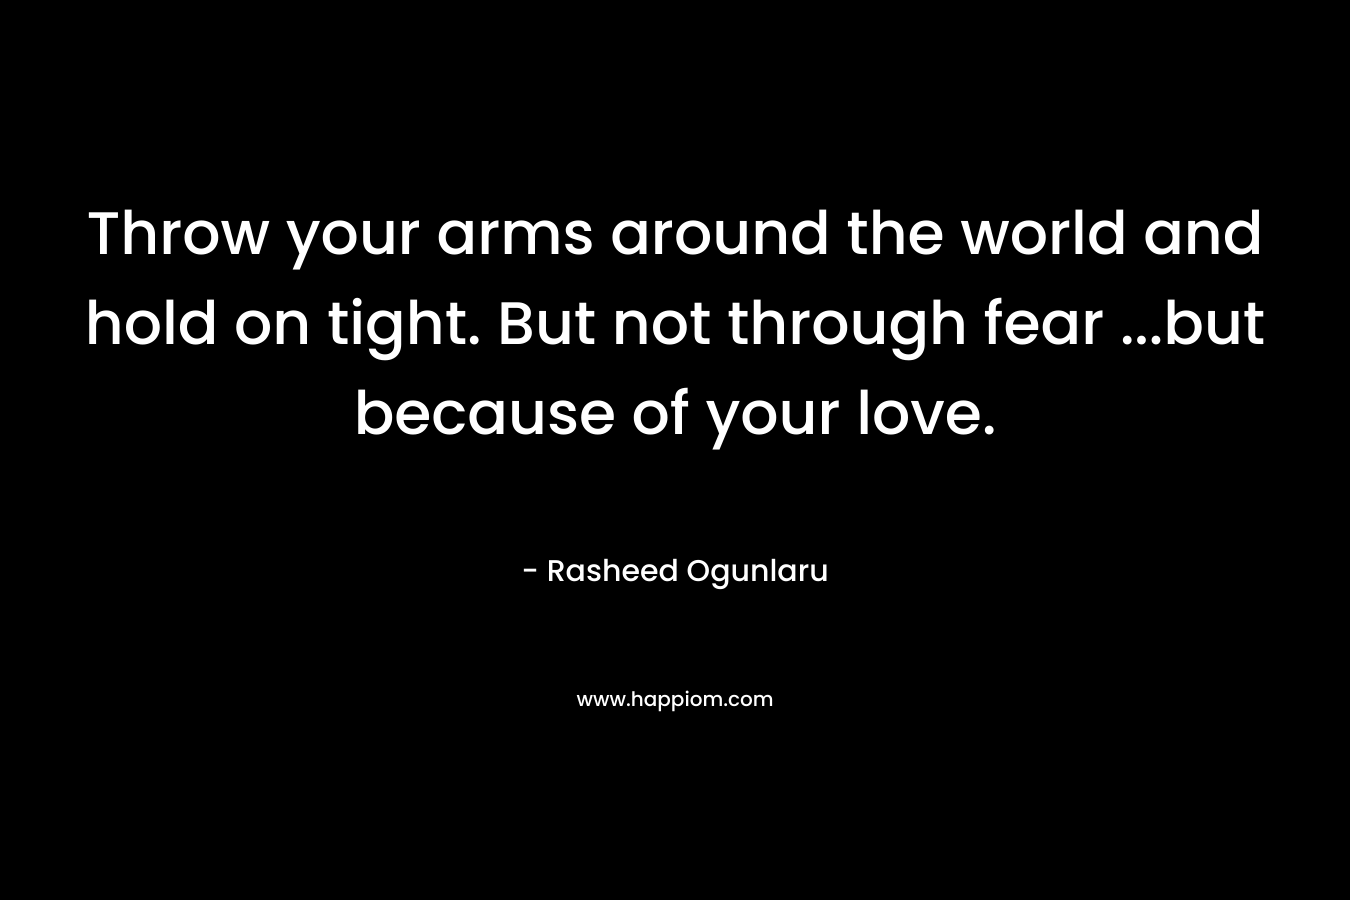 Throw your arms around the world and hold on tight. But not through fear ...but because of your love.